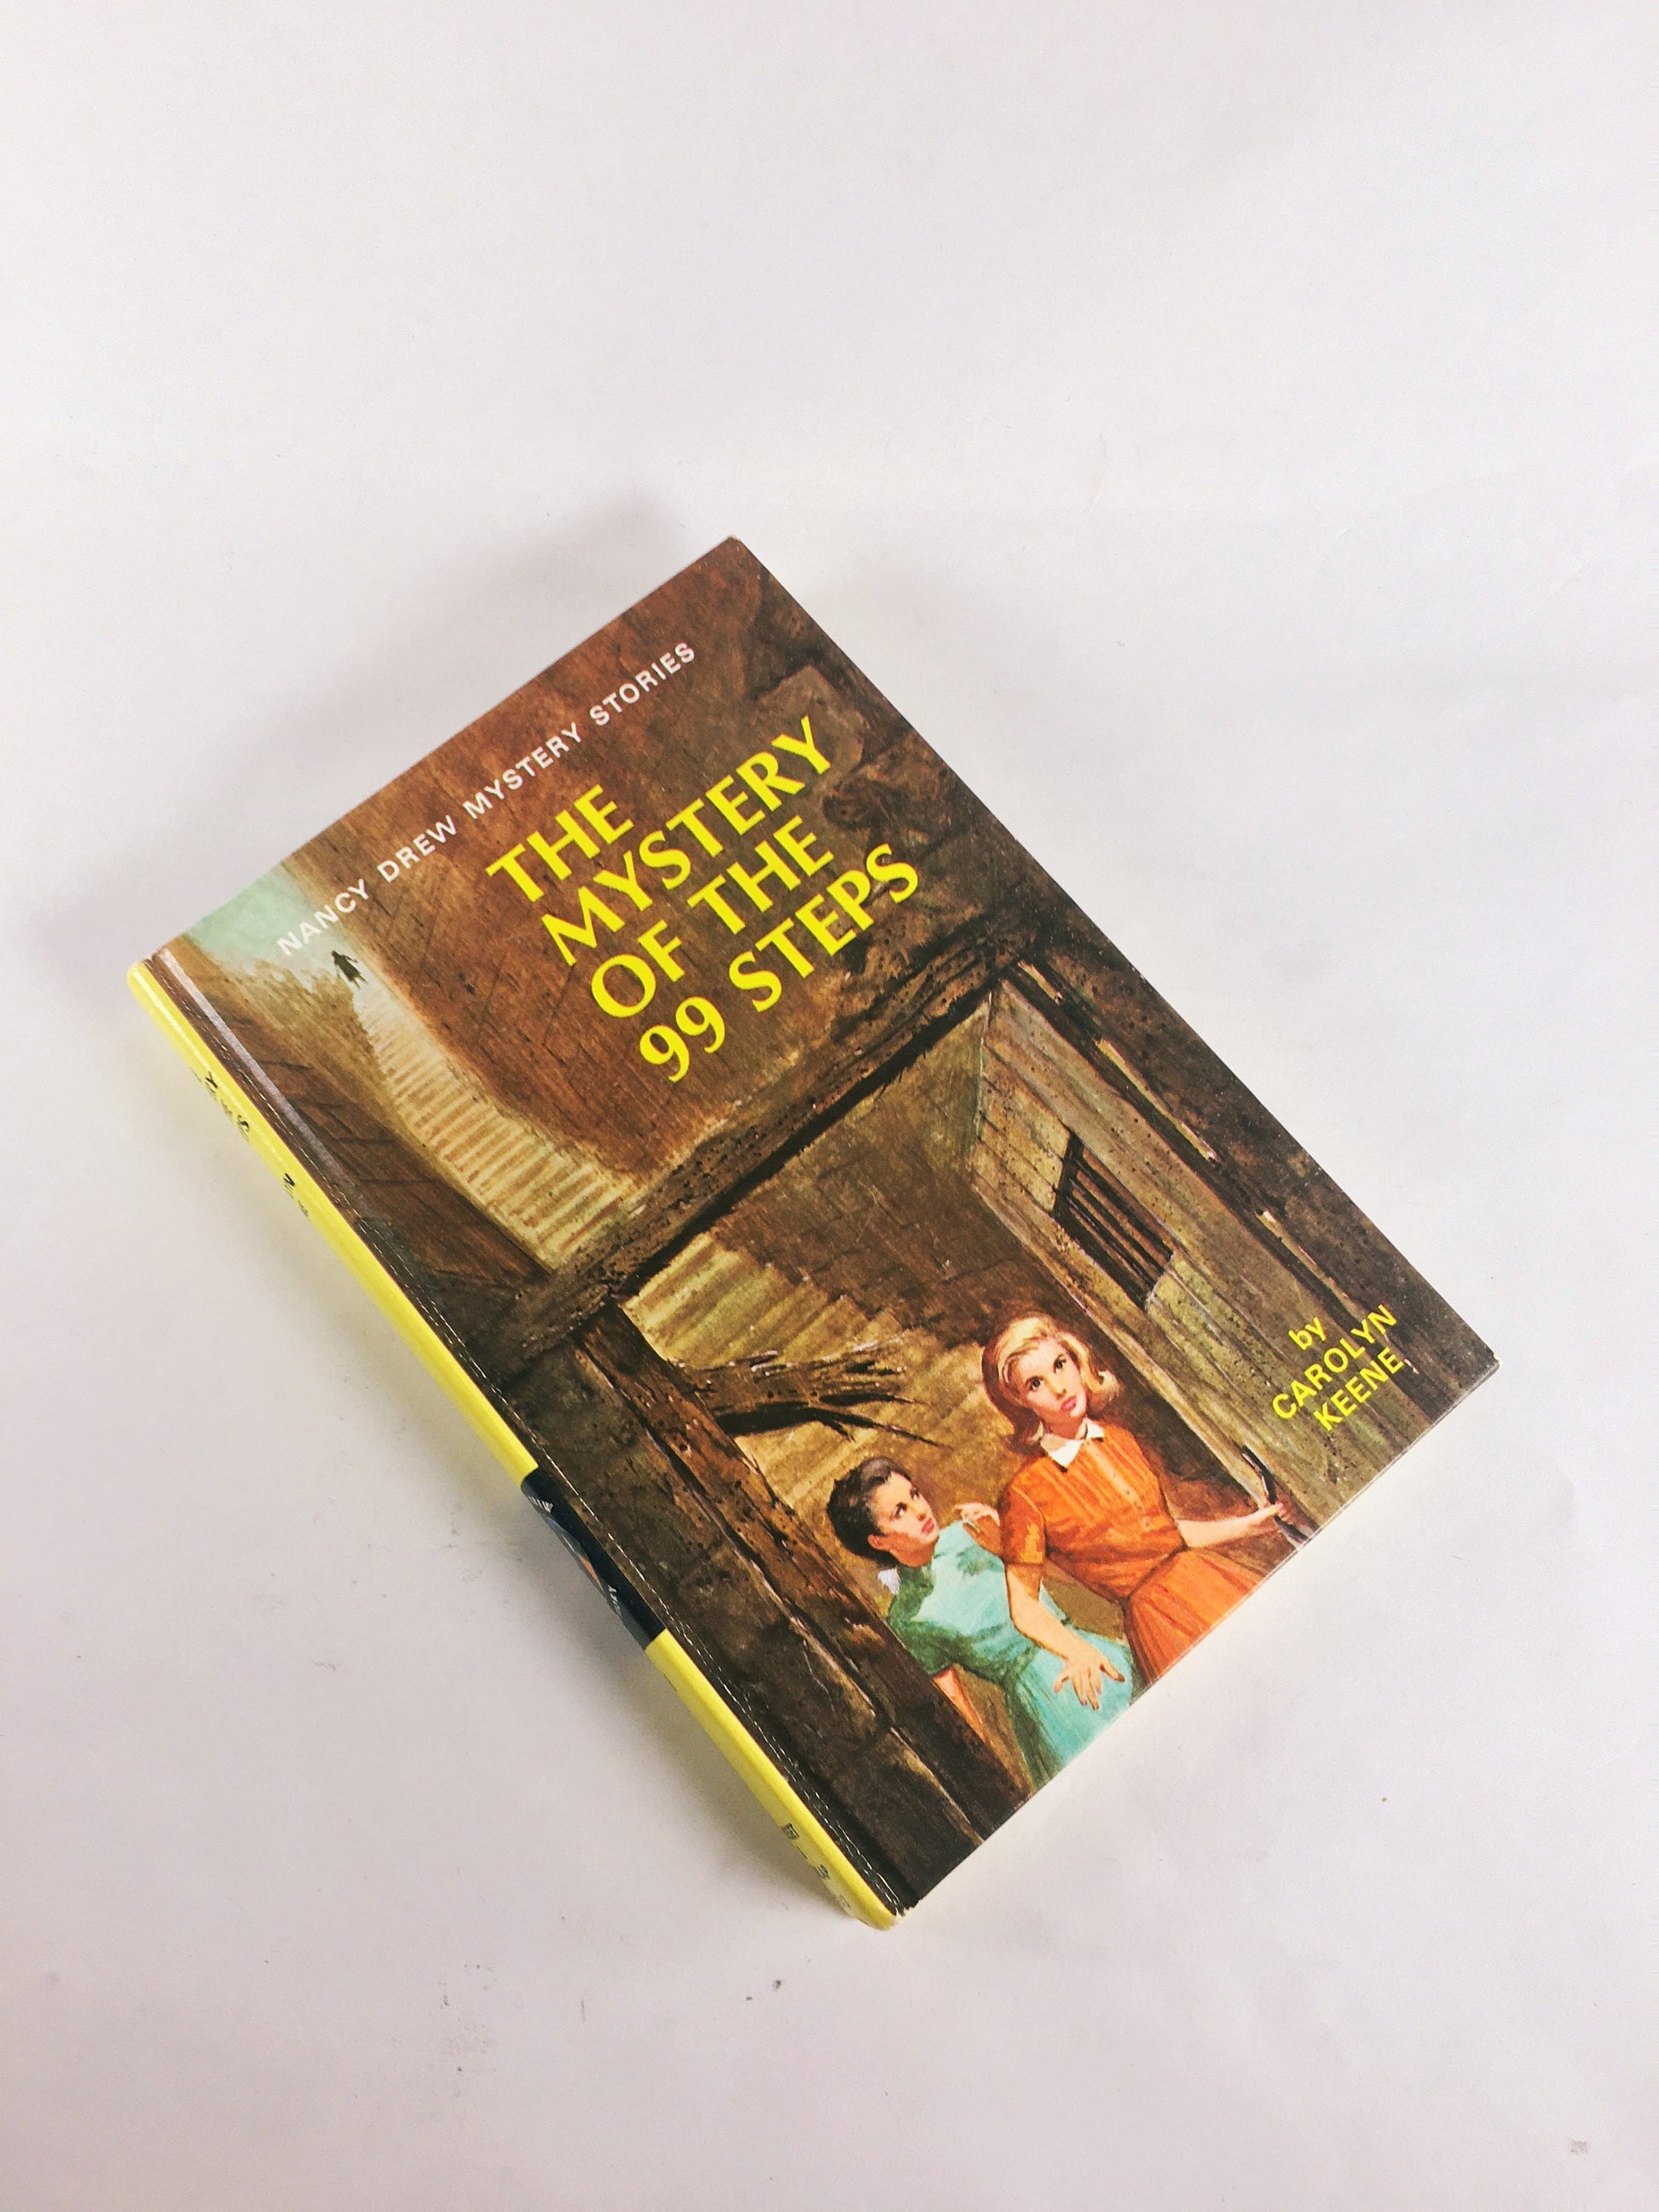 Nancy Drew Mystery Stories 1960s 1970 by Carolyn Keene. Vintage picture cover books with black & white endpapers. Teen tween reading yellow